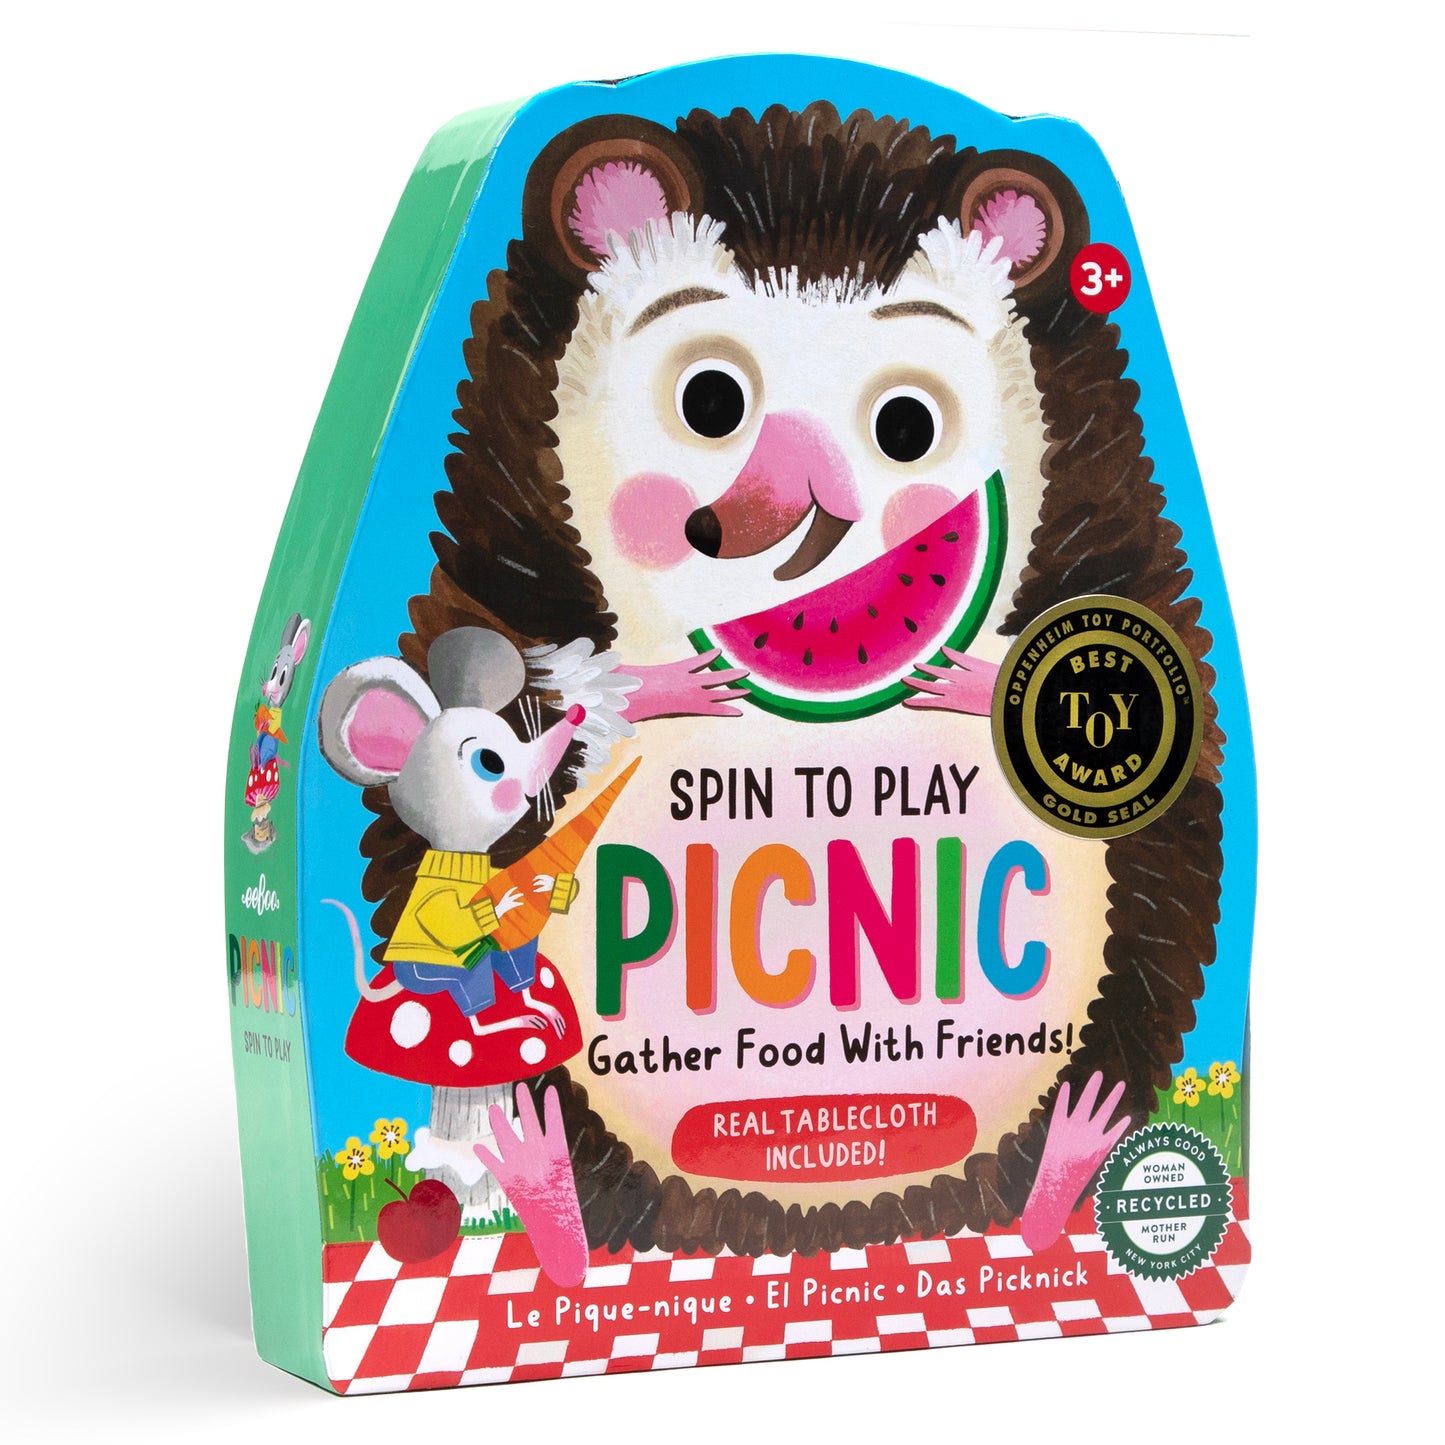 Picnic Lunch Shaped Spinner Award Winning Game | Fun Unique Game for Kids Ages 3+